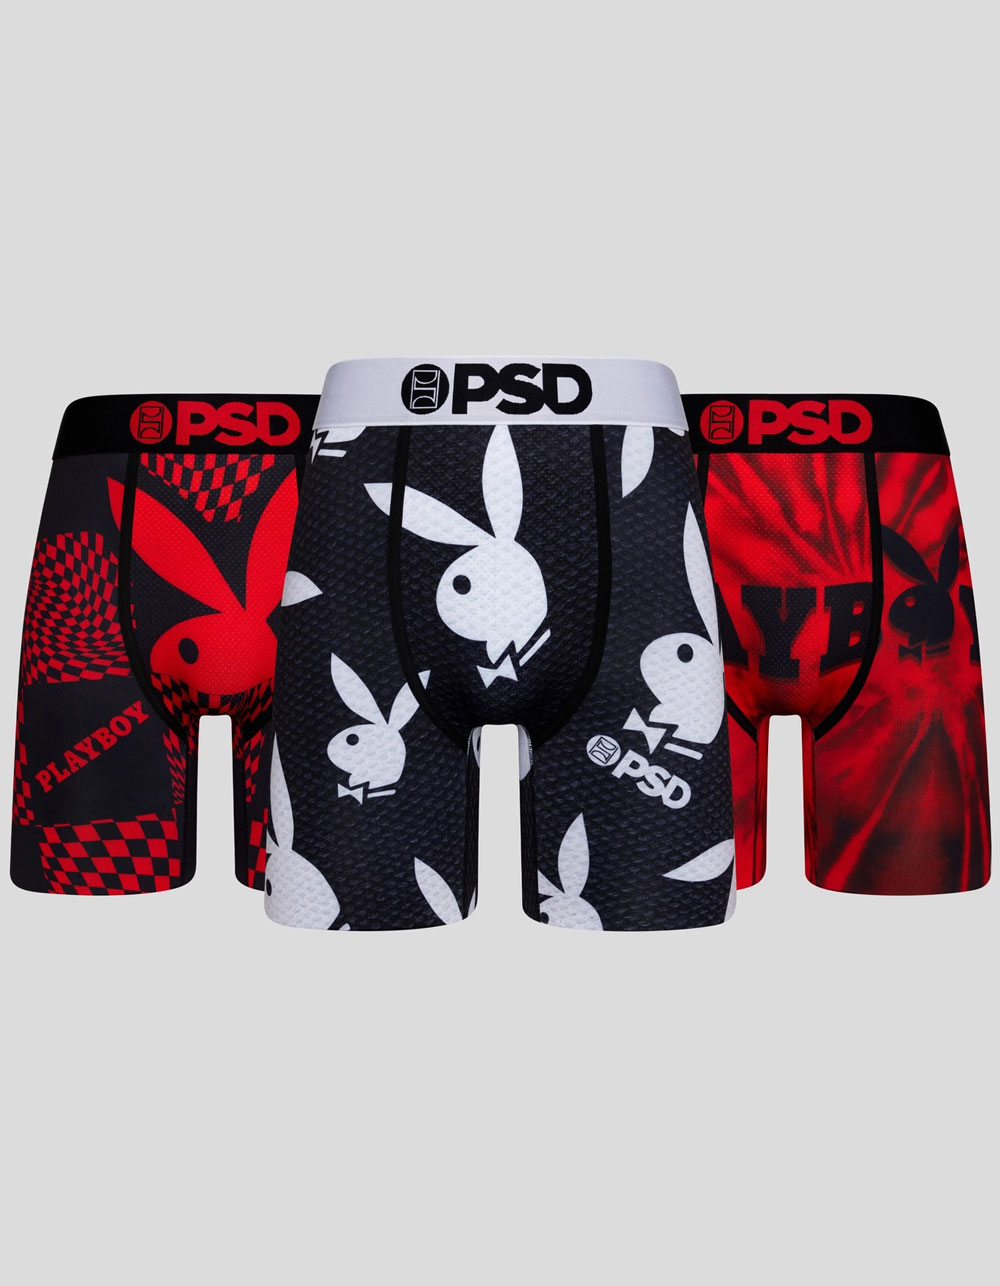 Tilly's: This Just IN: PSD Underwear